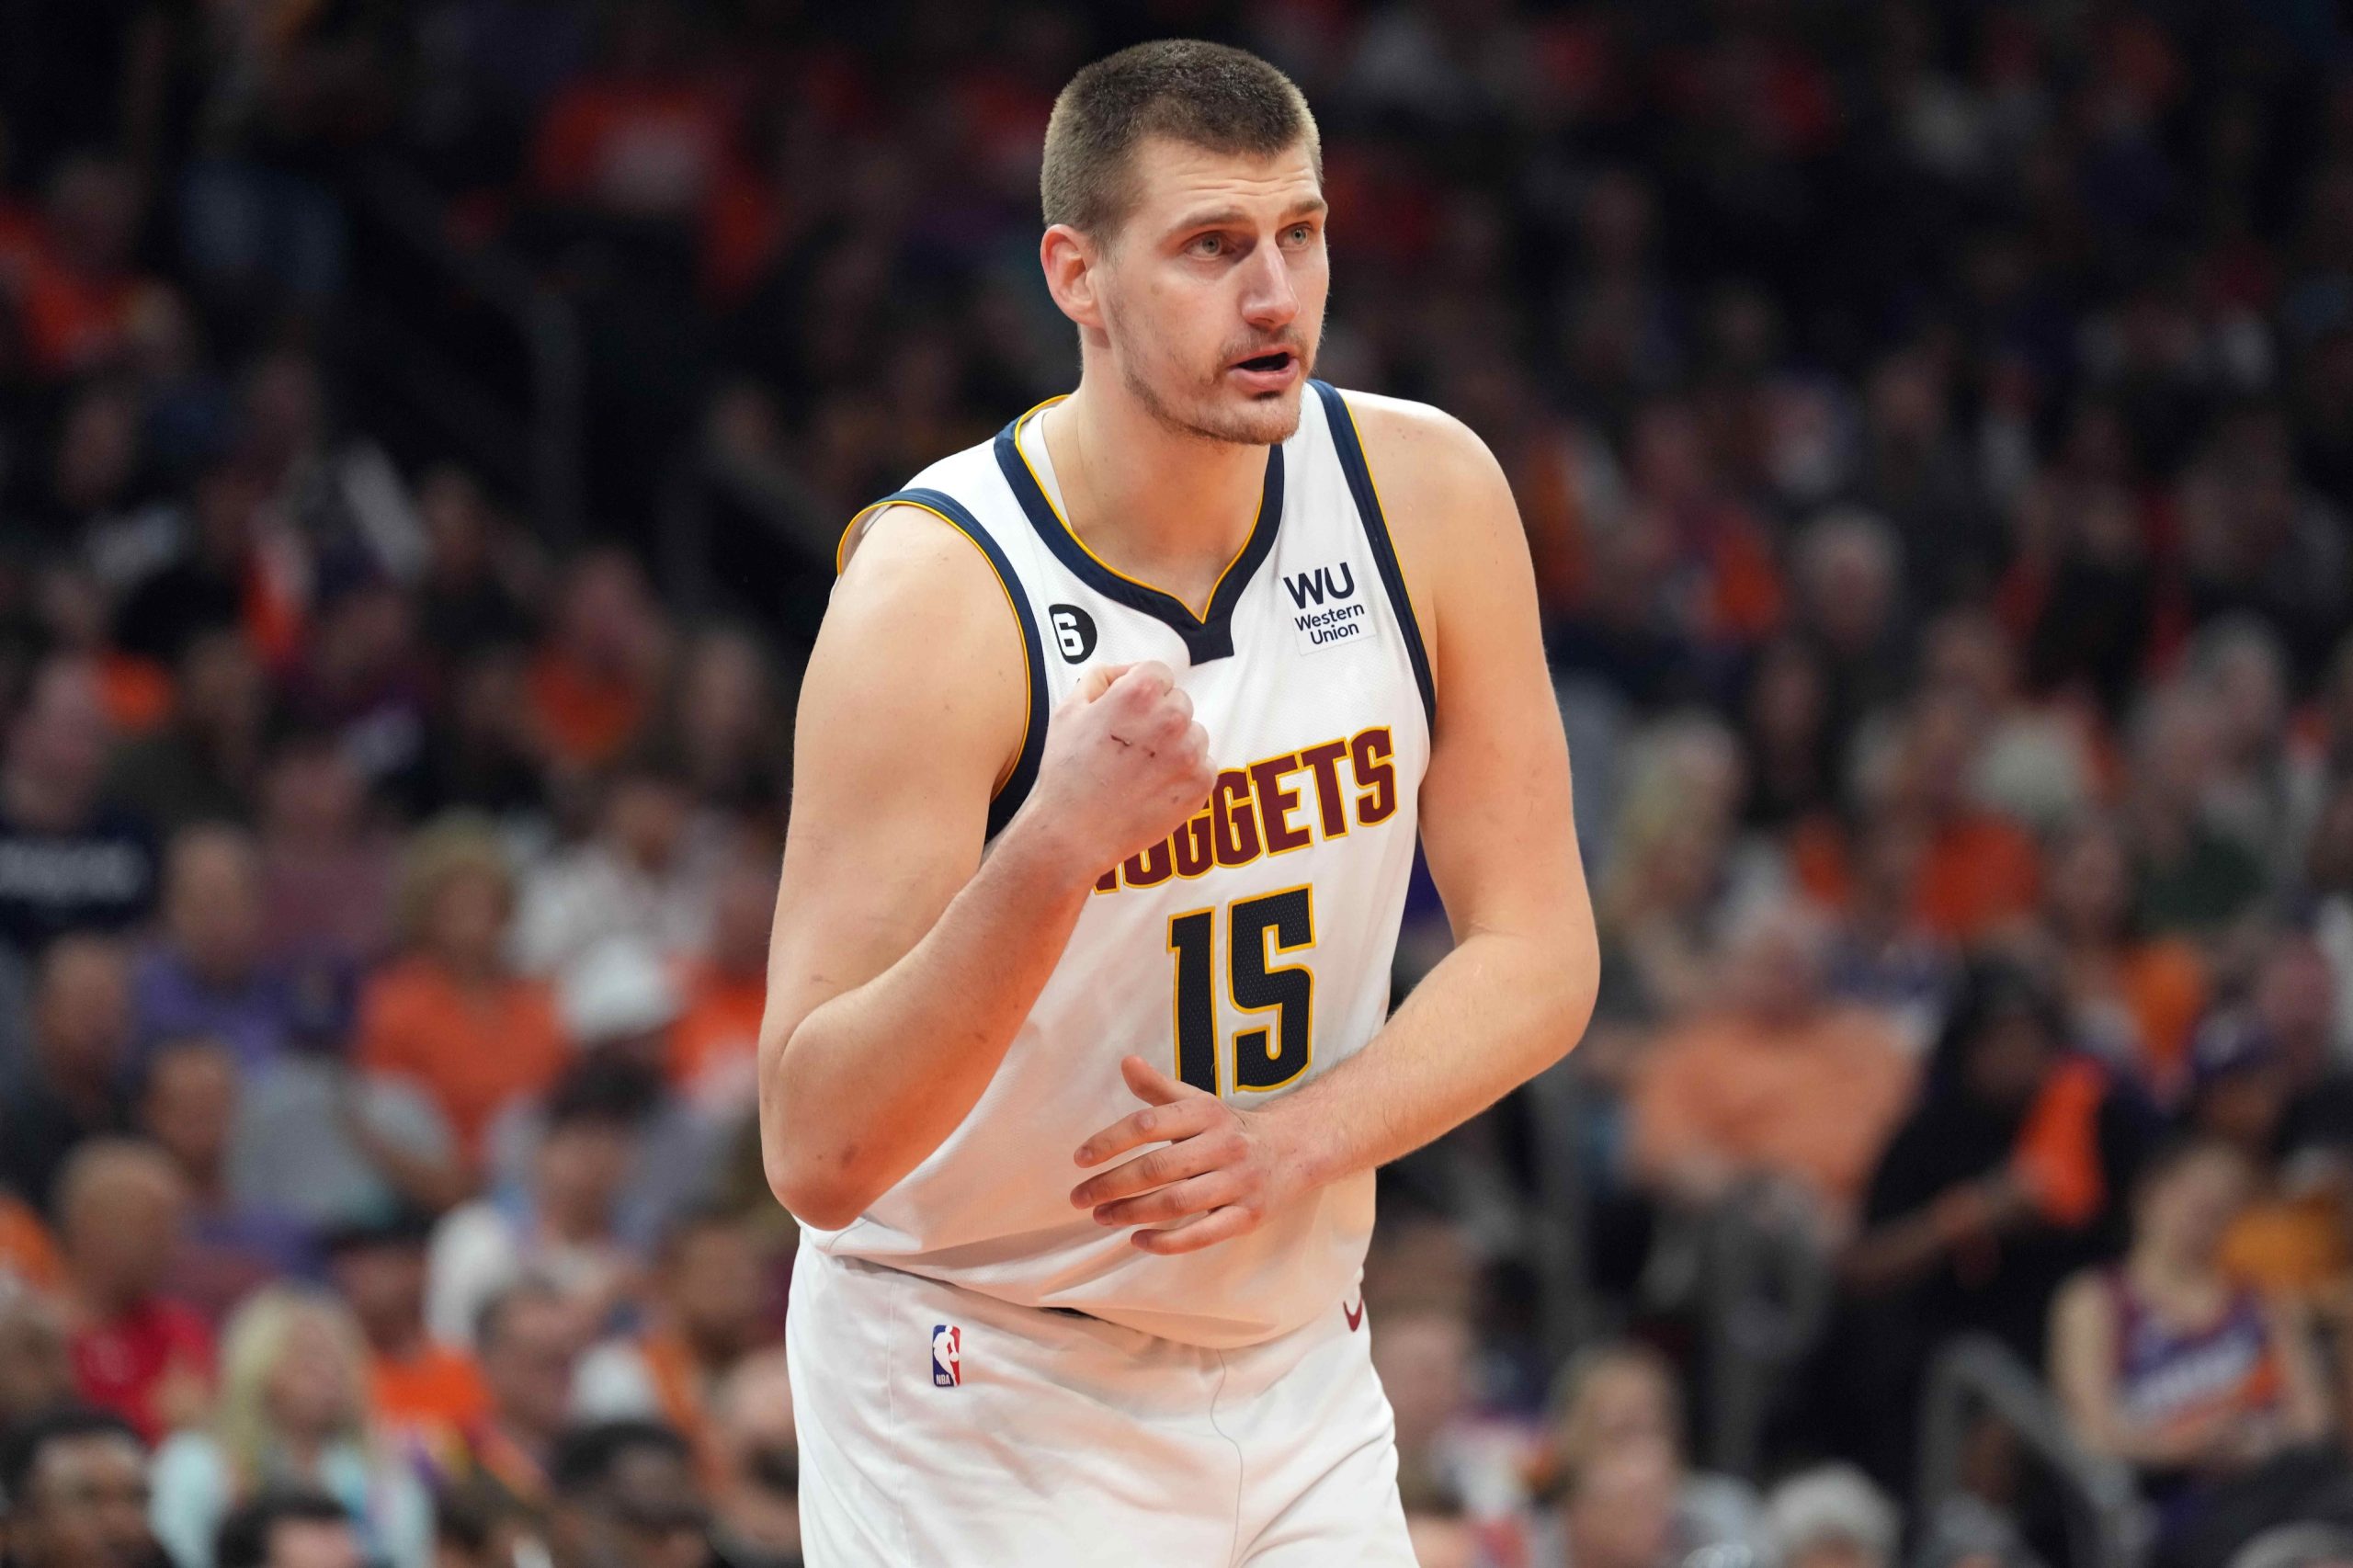 Nikola Jokic looks to lead the Nuggets over the Lakers